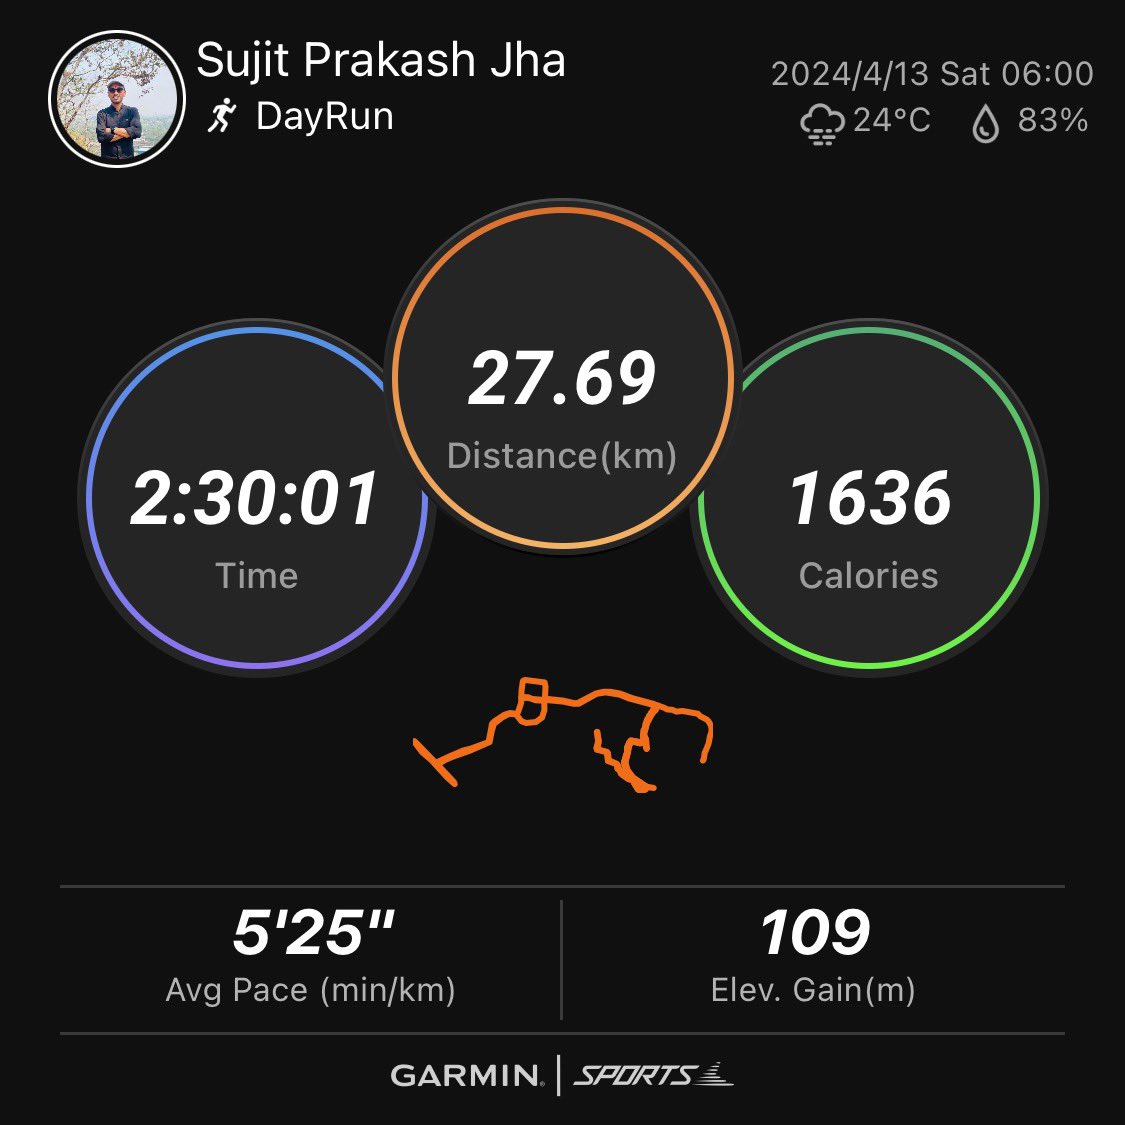 Here is a summary card for today’s run. It was easy one for 150 minutes.  🙏🙂
@FitIndiaOff 
@kheloindia 
@KhelMaithili